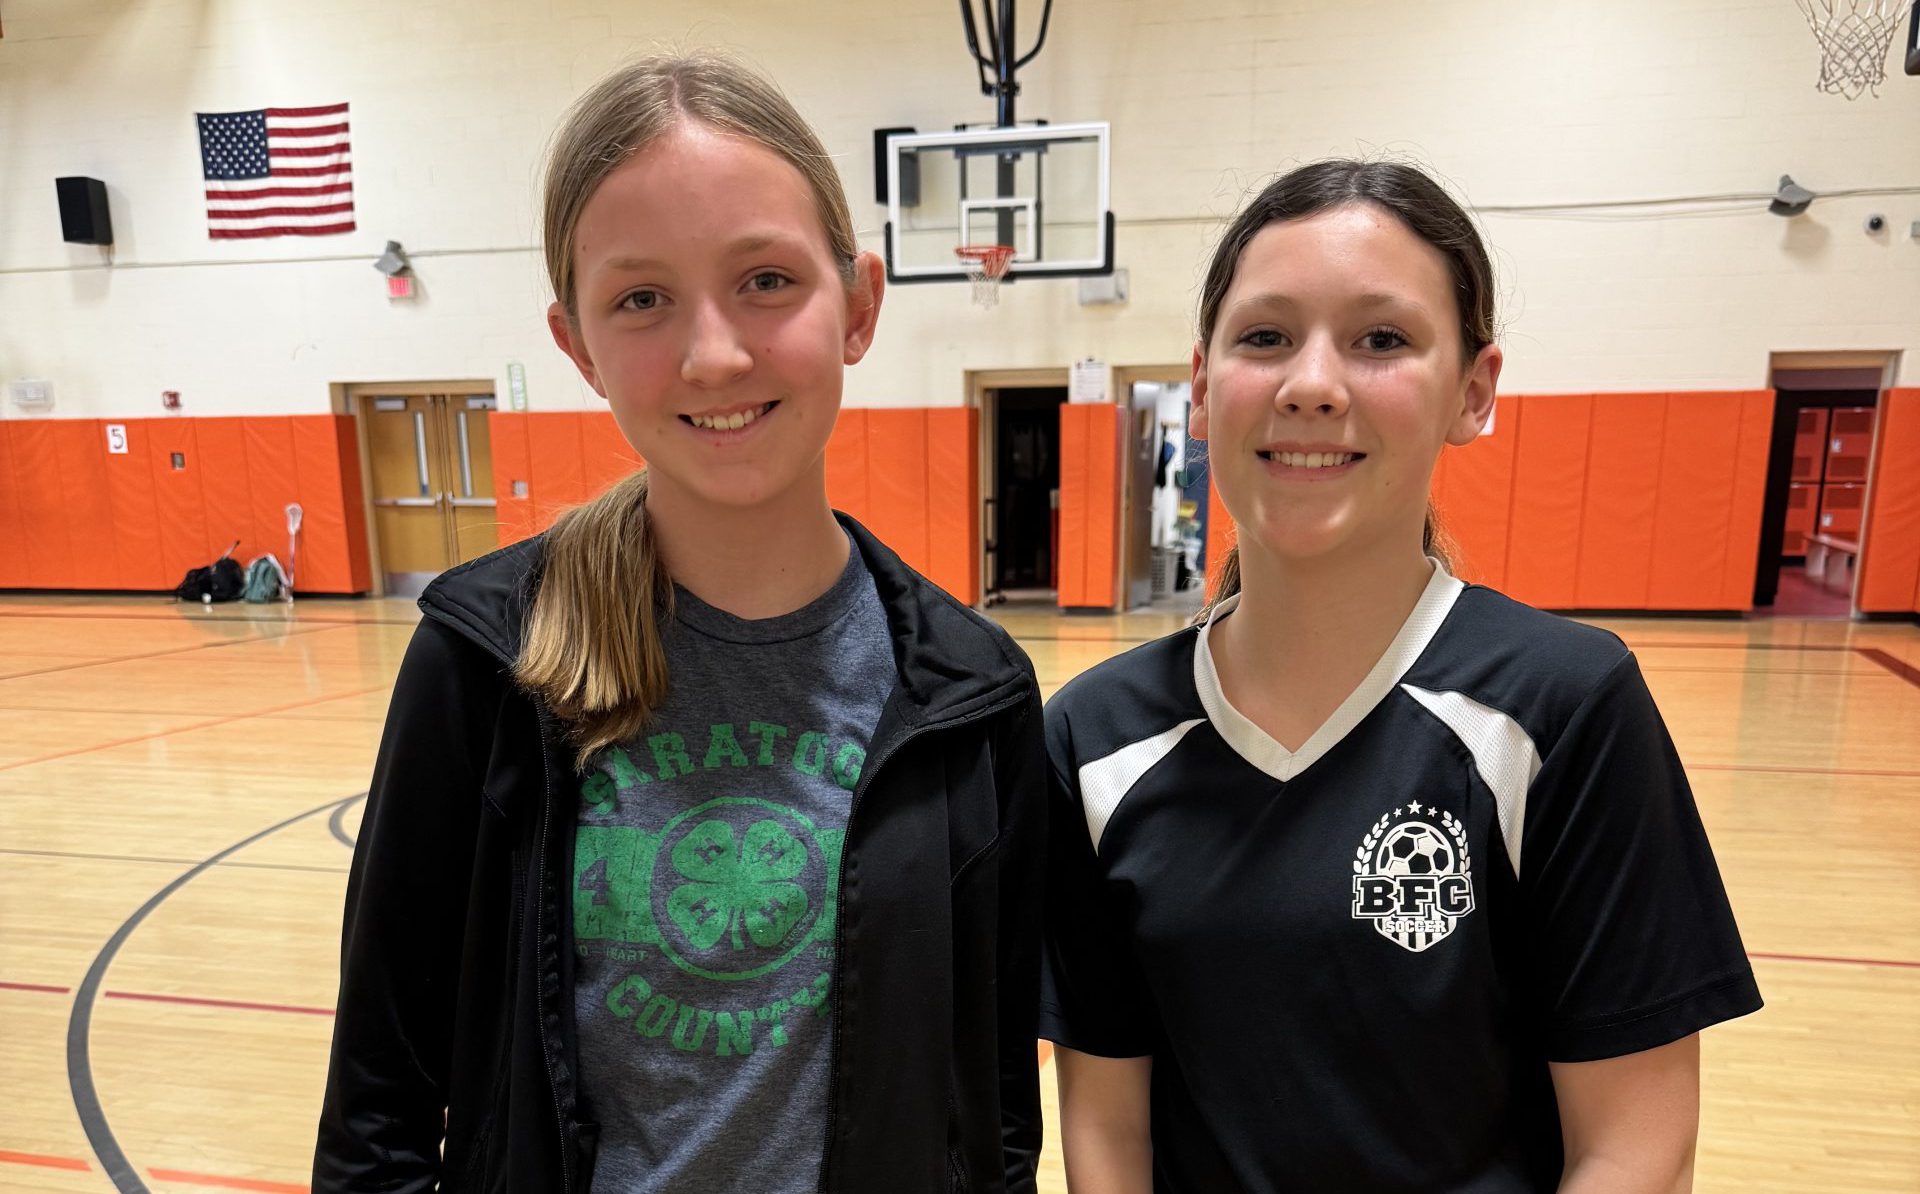 Two middle school students standing in gymnasium